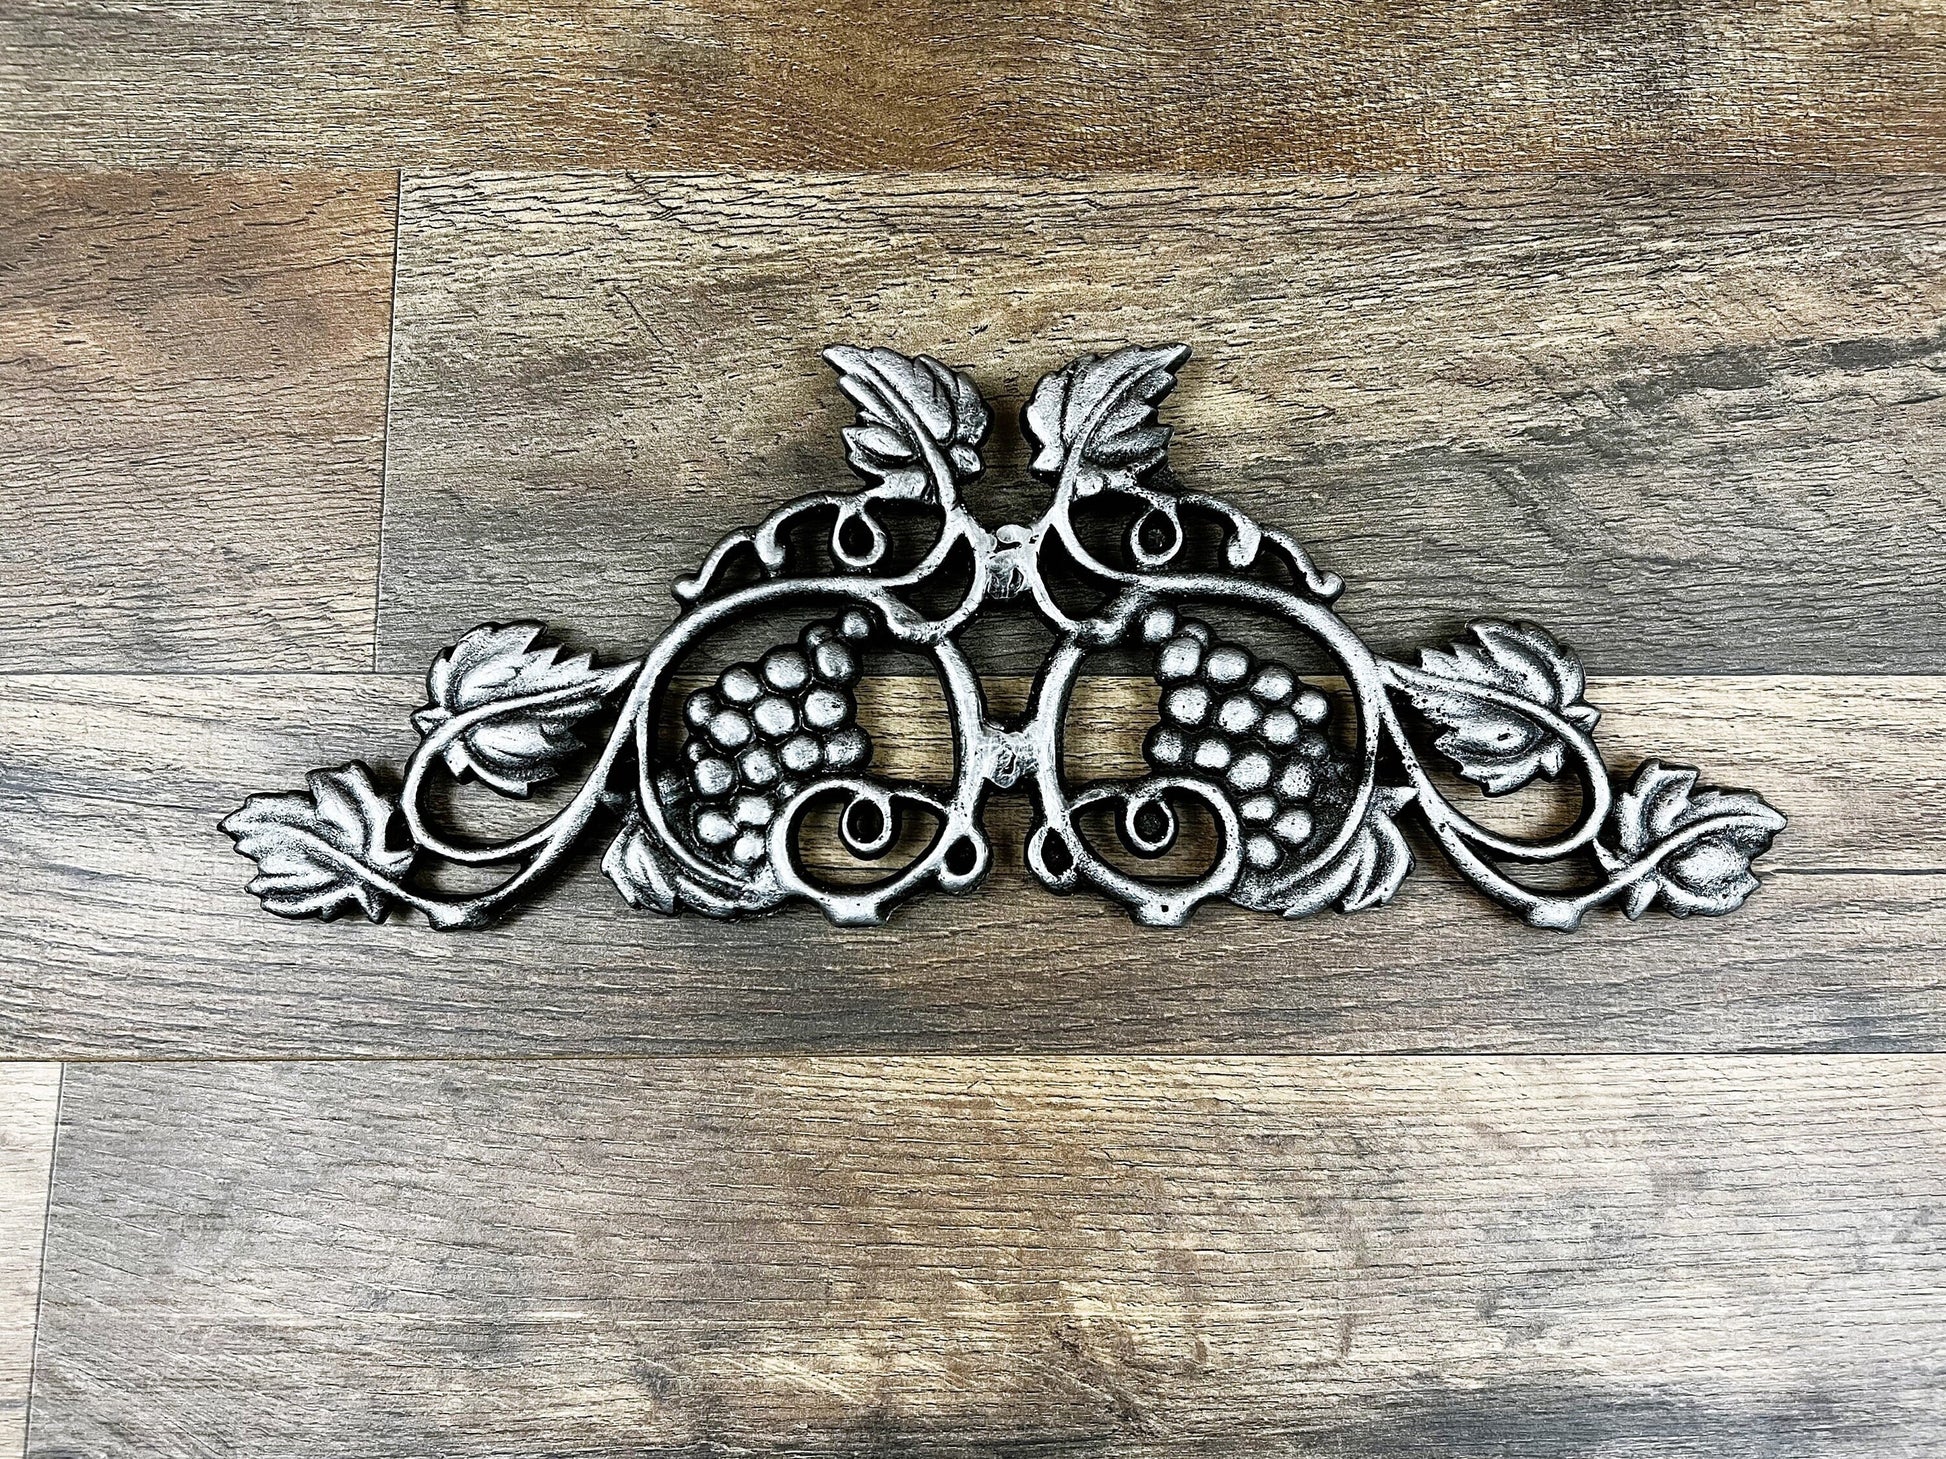 Grapevine Wall Mount Paper Towel Holder